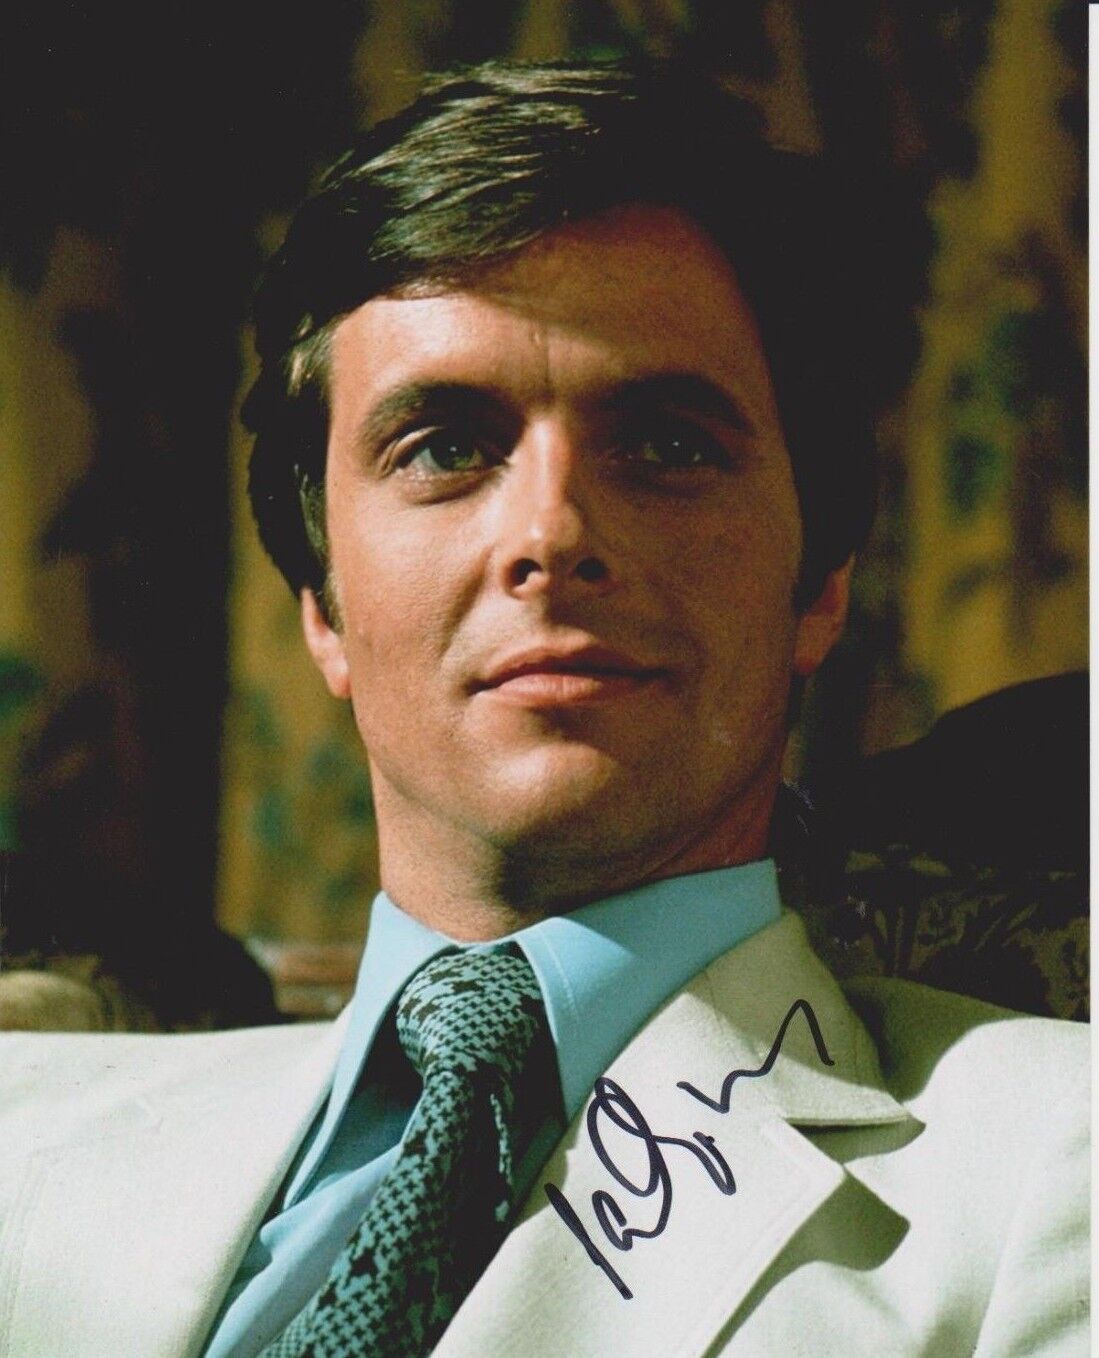 Ian Ogilvy Signed 8x10 Photo Poster painting - Return of the Saint - RARE!! SEXY!!! G619